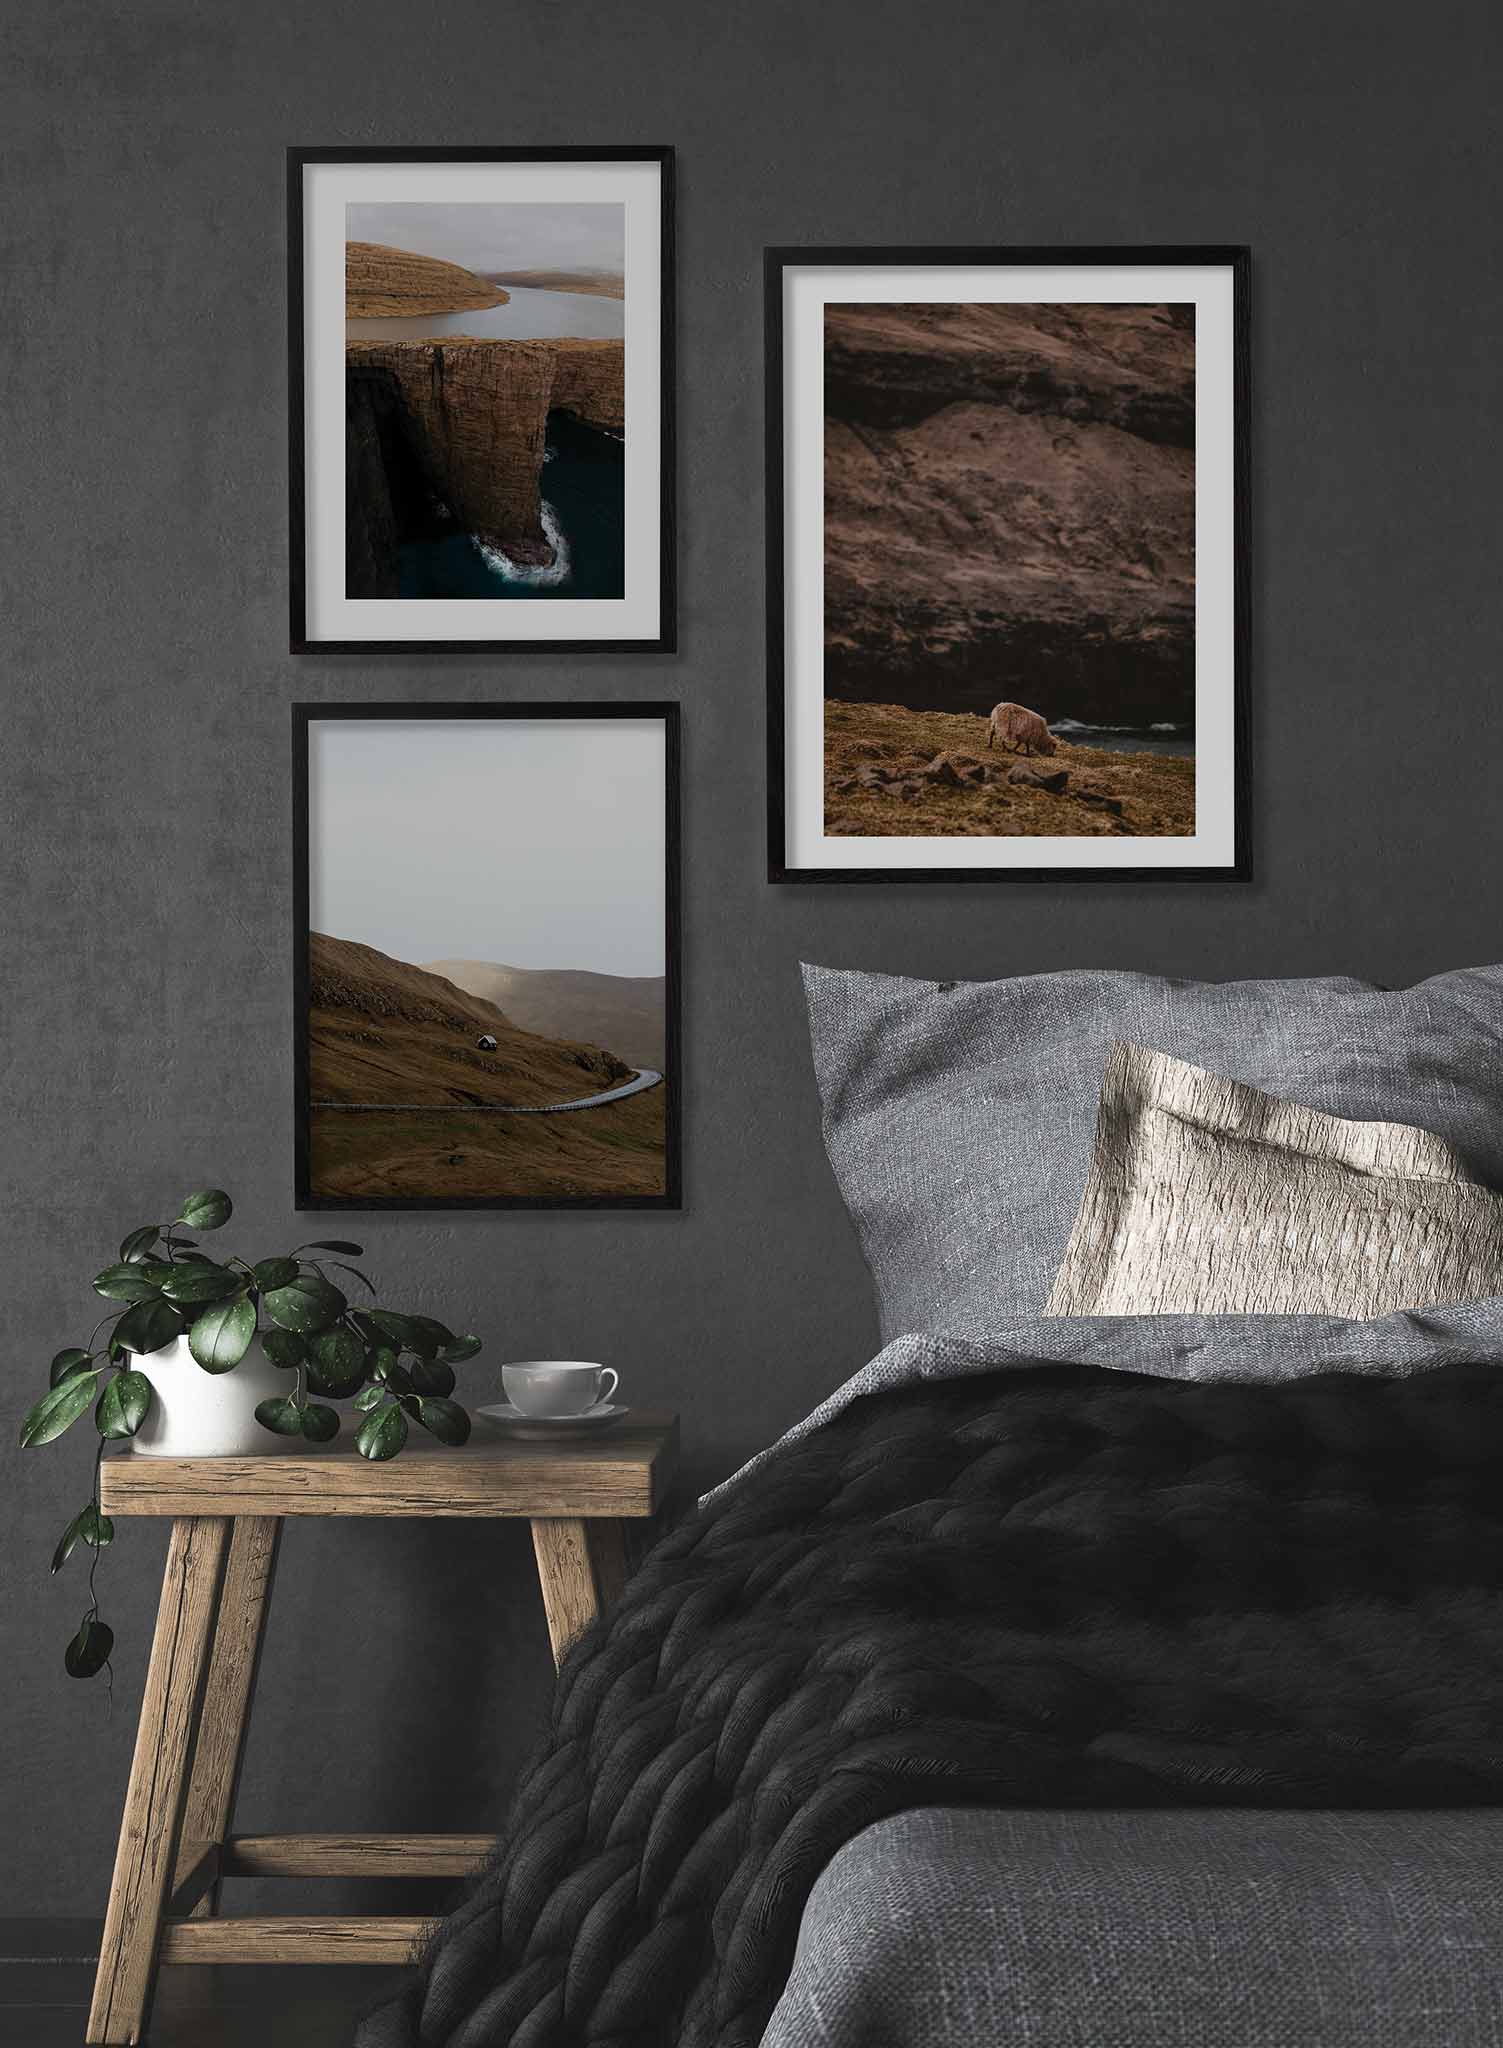 Wandering Sheep' is a landscape photography poster by Opposite Wall of a lone white sheep wandering in green grass by a river and a tall rocky cliff.